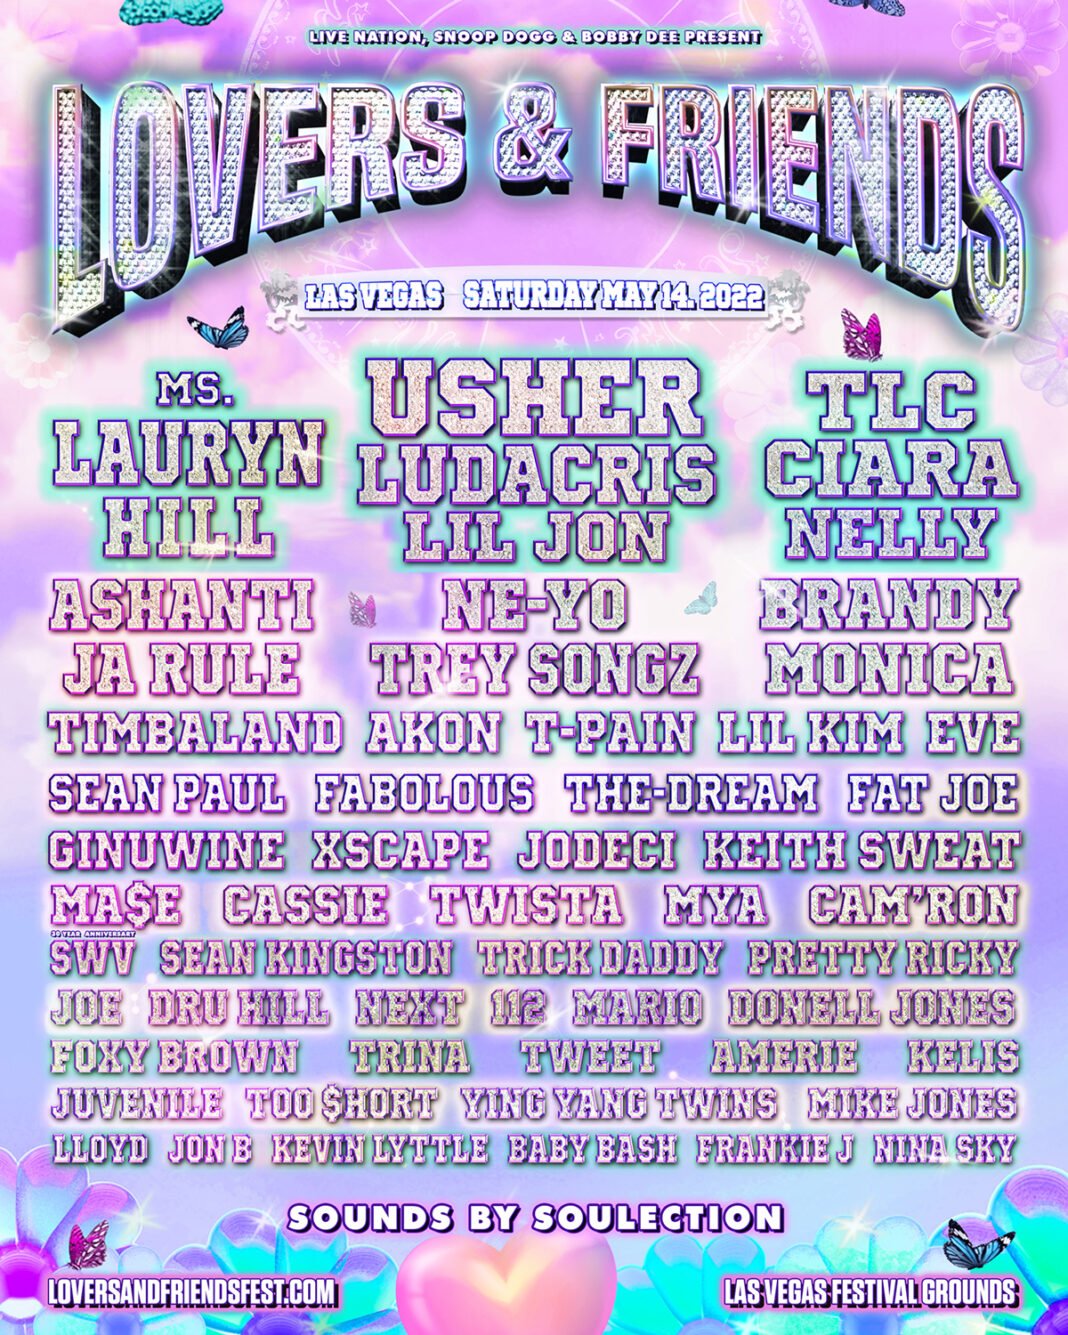 R&B and Hip Hop festival ‘The Lovers & Friends’ will take place at the